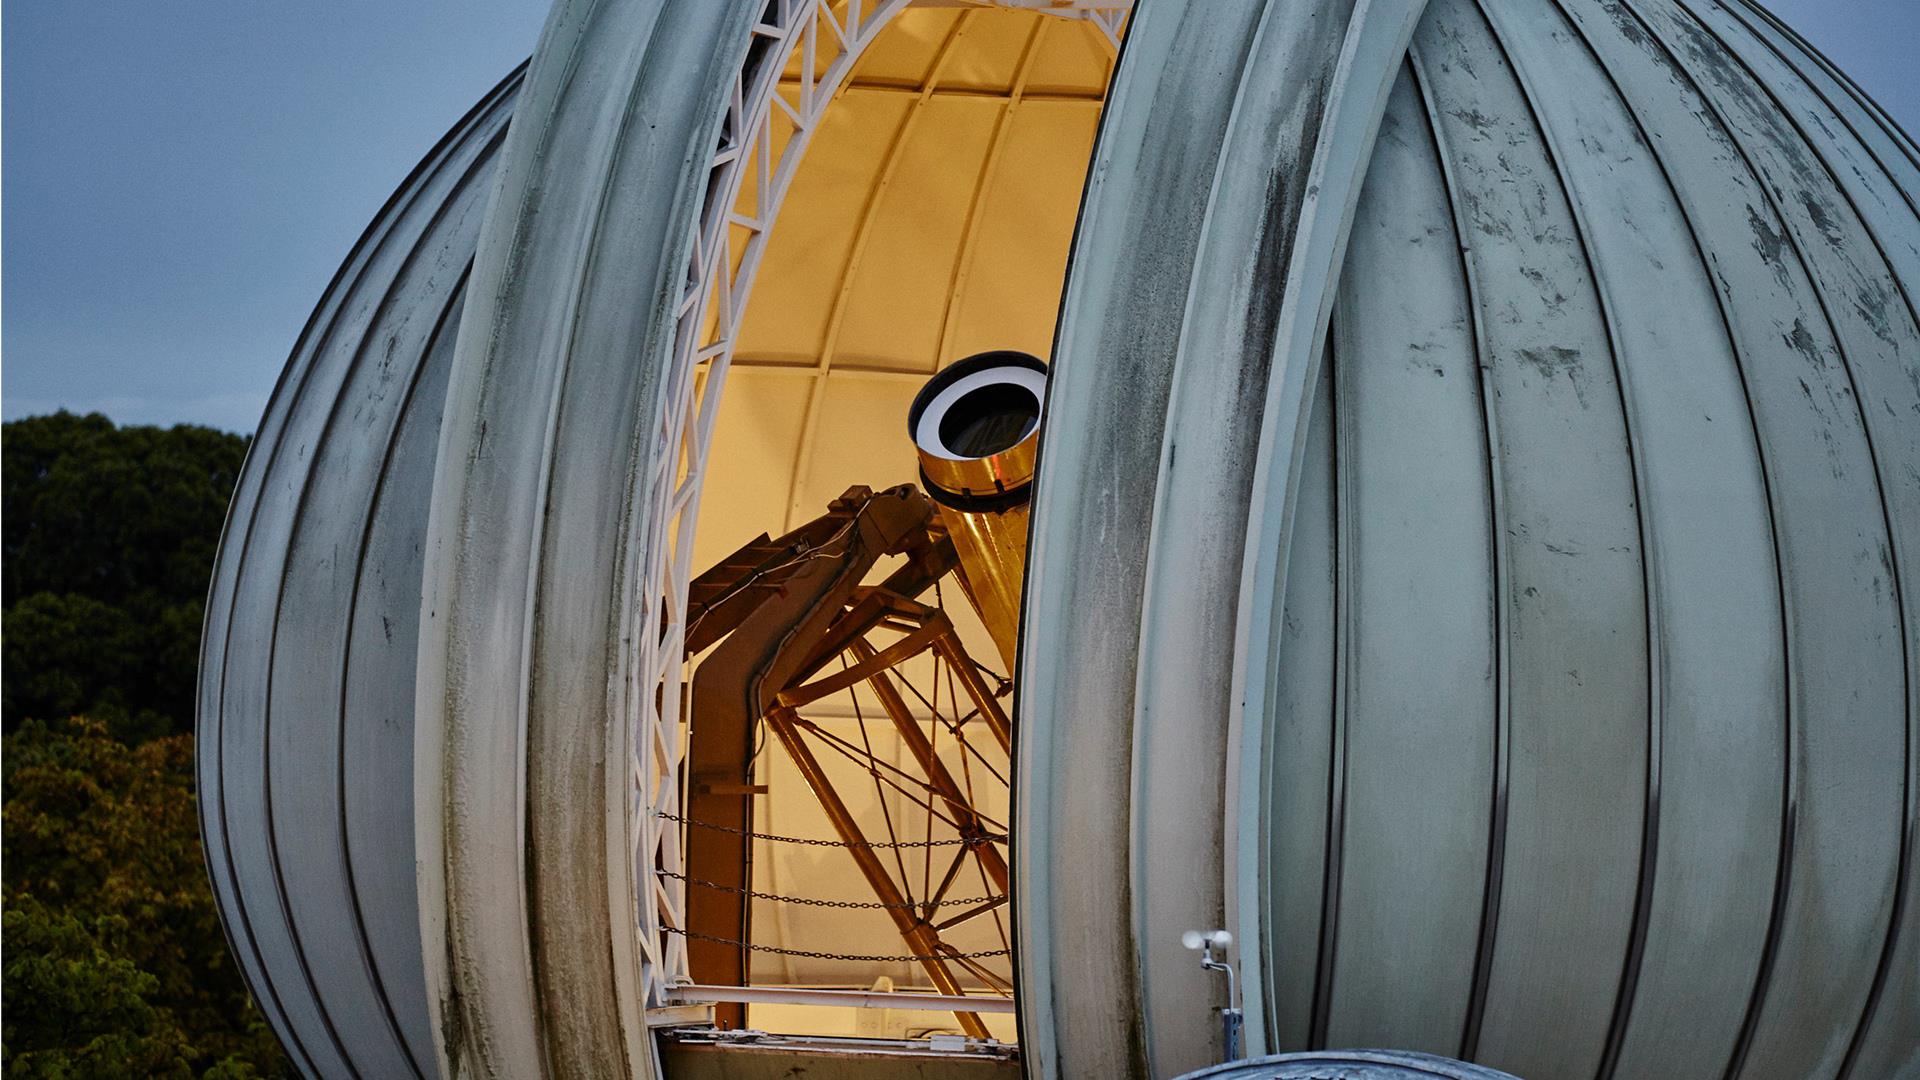 The Great Equatorial Telescope at the Royal Observatory in Greenwich.